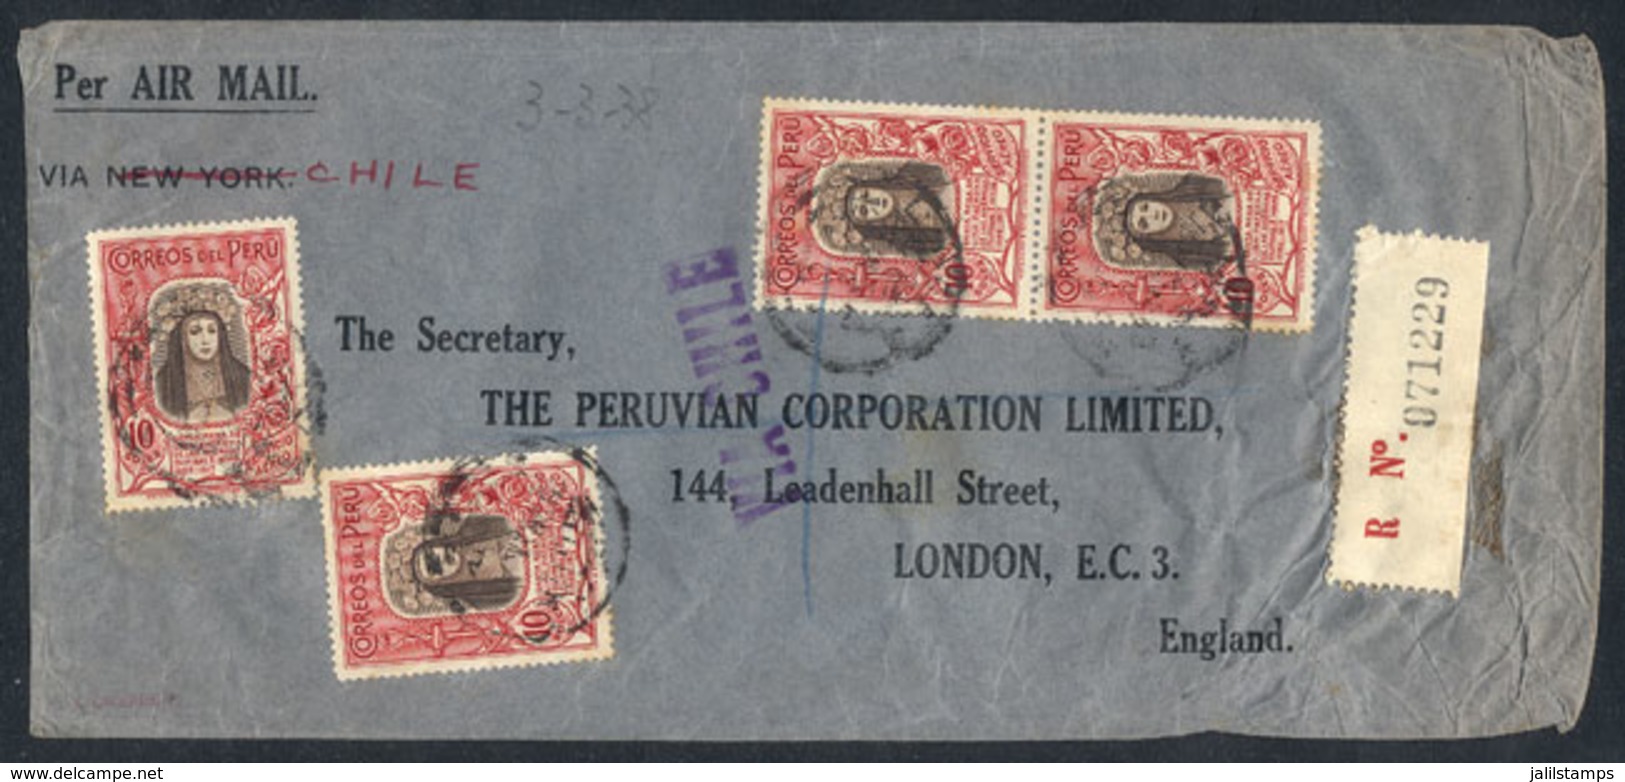 PERU: Spectacular Postage Of 40 Soles (Sc.C39 X4) On A Registered Airmail Cover Sent From Lima To England On 3/MAR/1938, - Peru